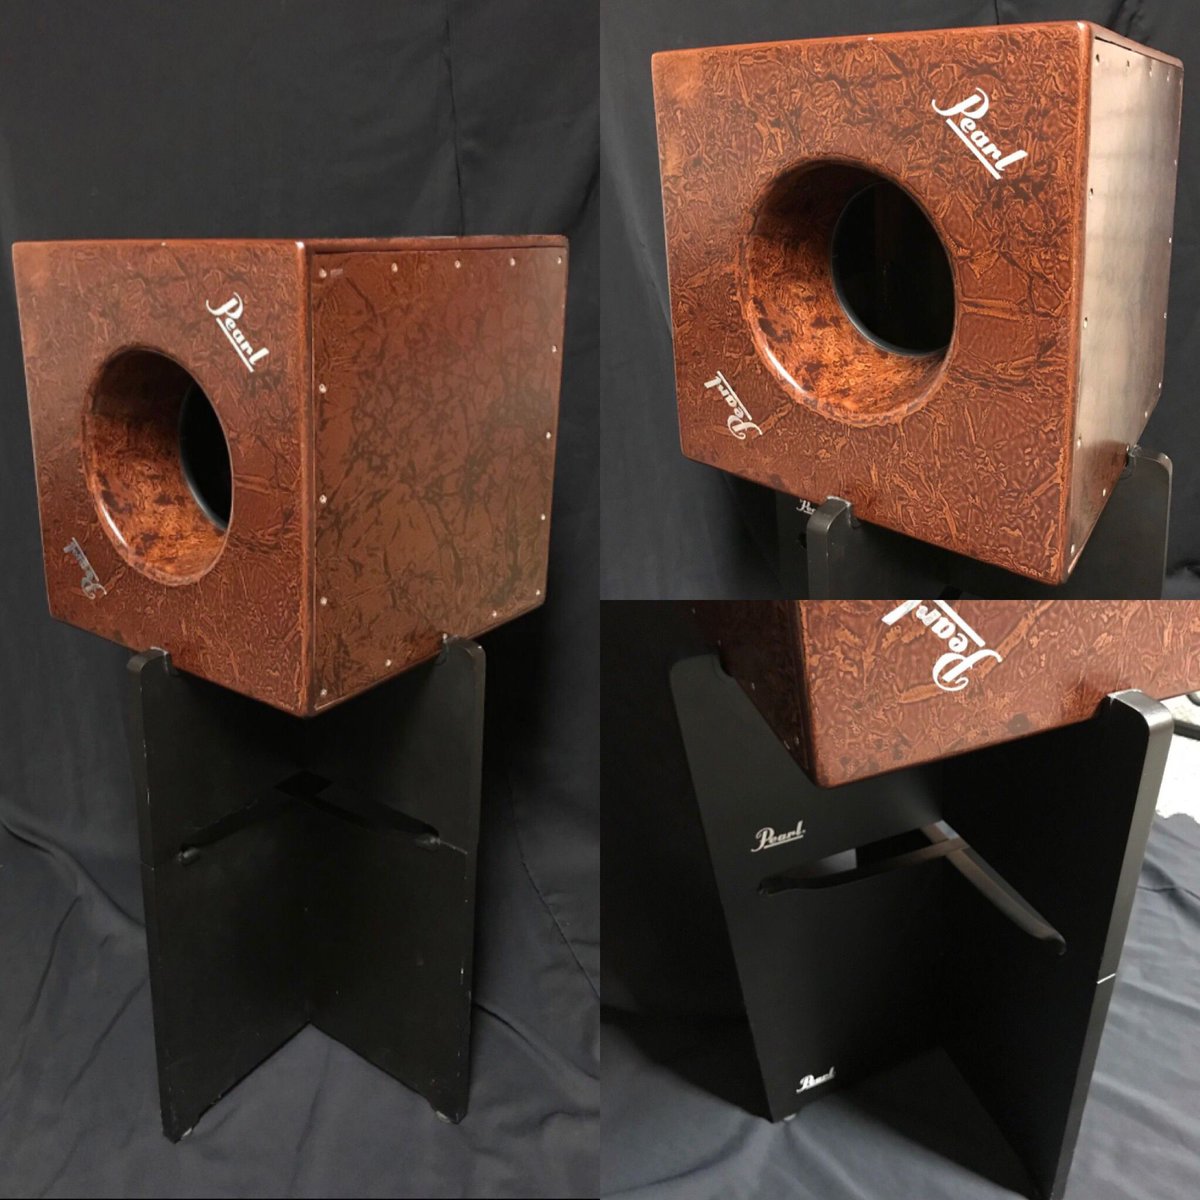 Sit or stand with this versatile Cube Cajon from @PearlDrumCorp. Available on our @reverbdotcom page: buff.ly/2HNhwln #handdrum #Cajon #drums #music #pearl